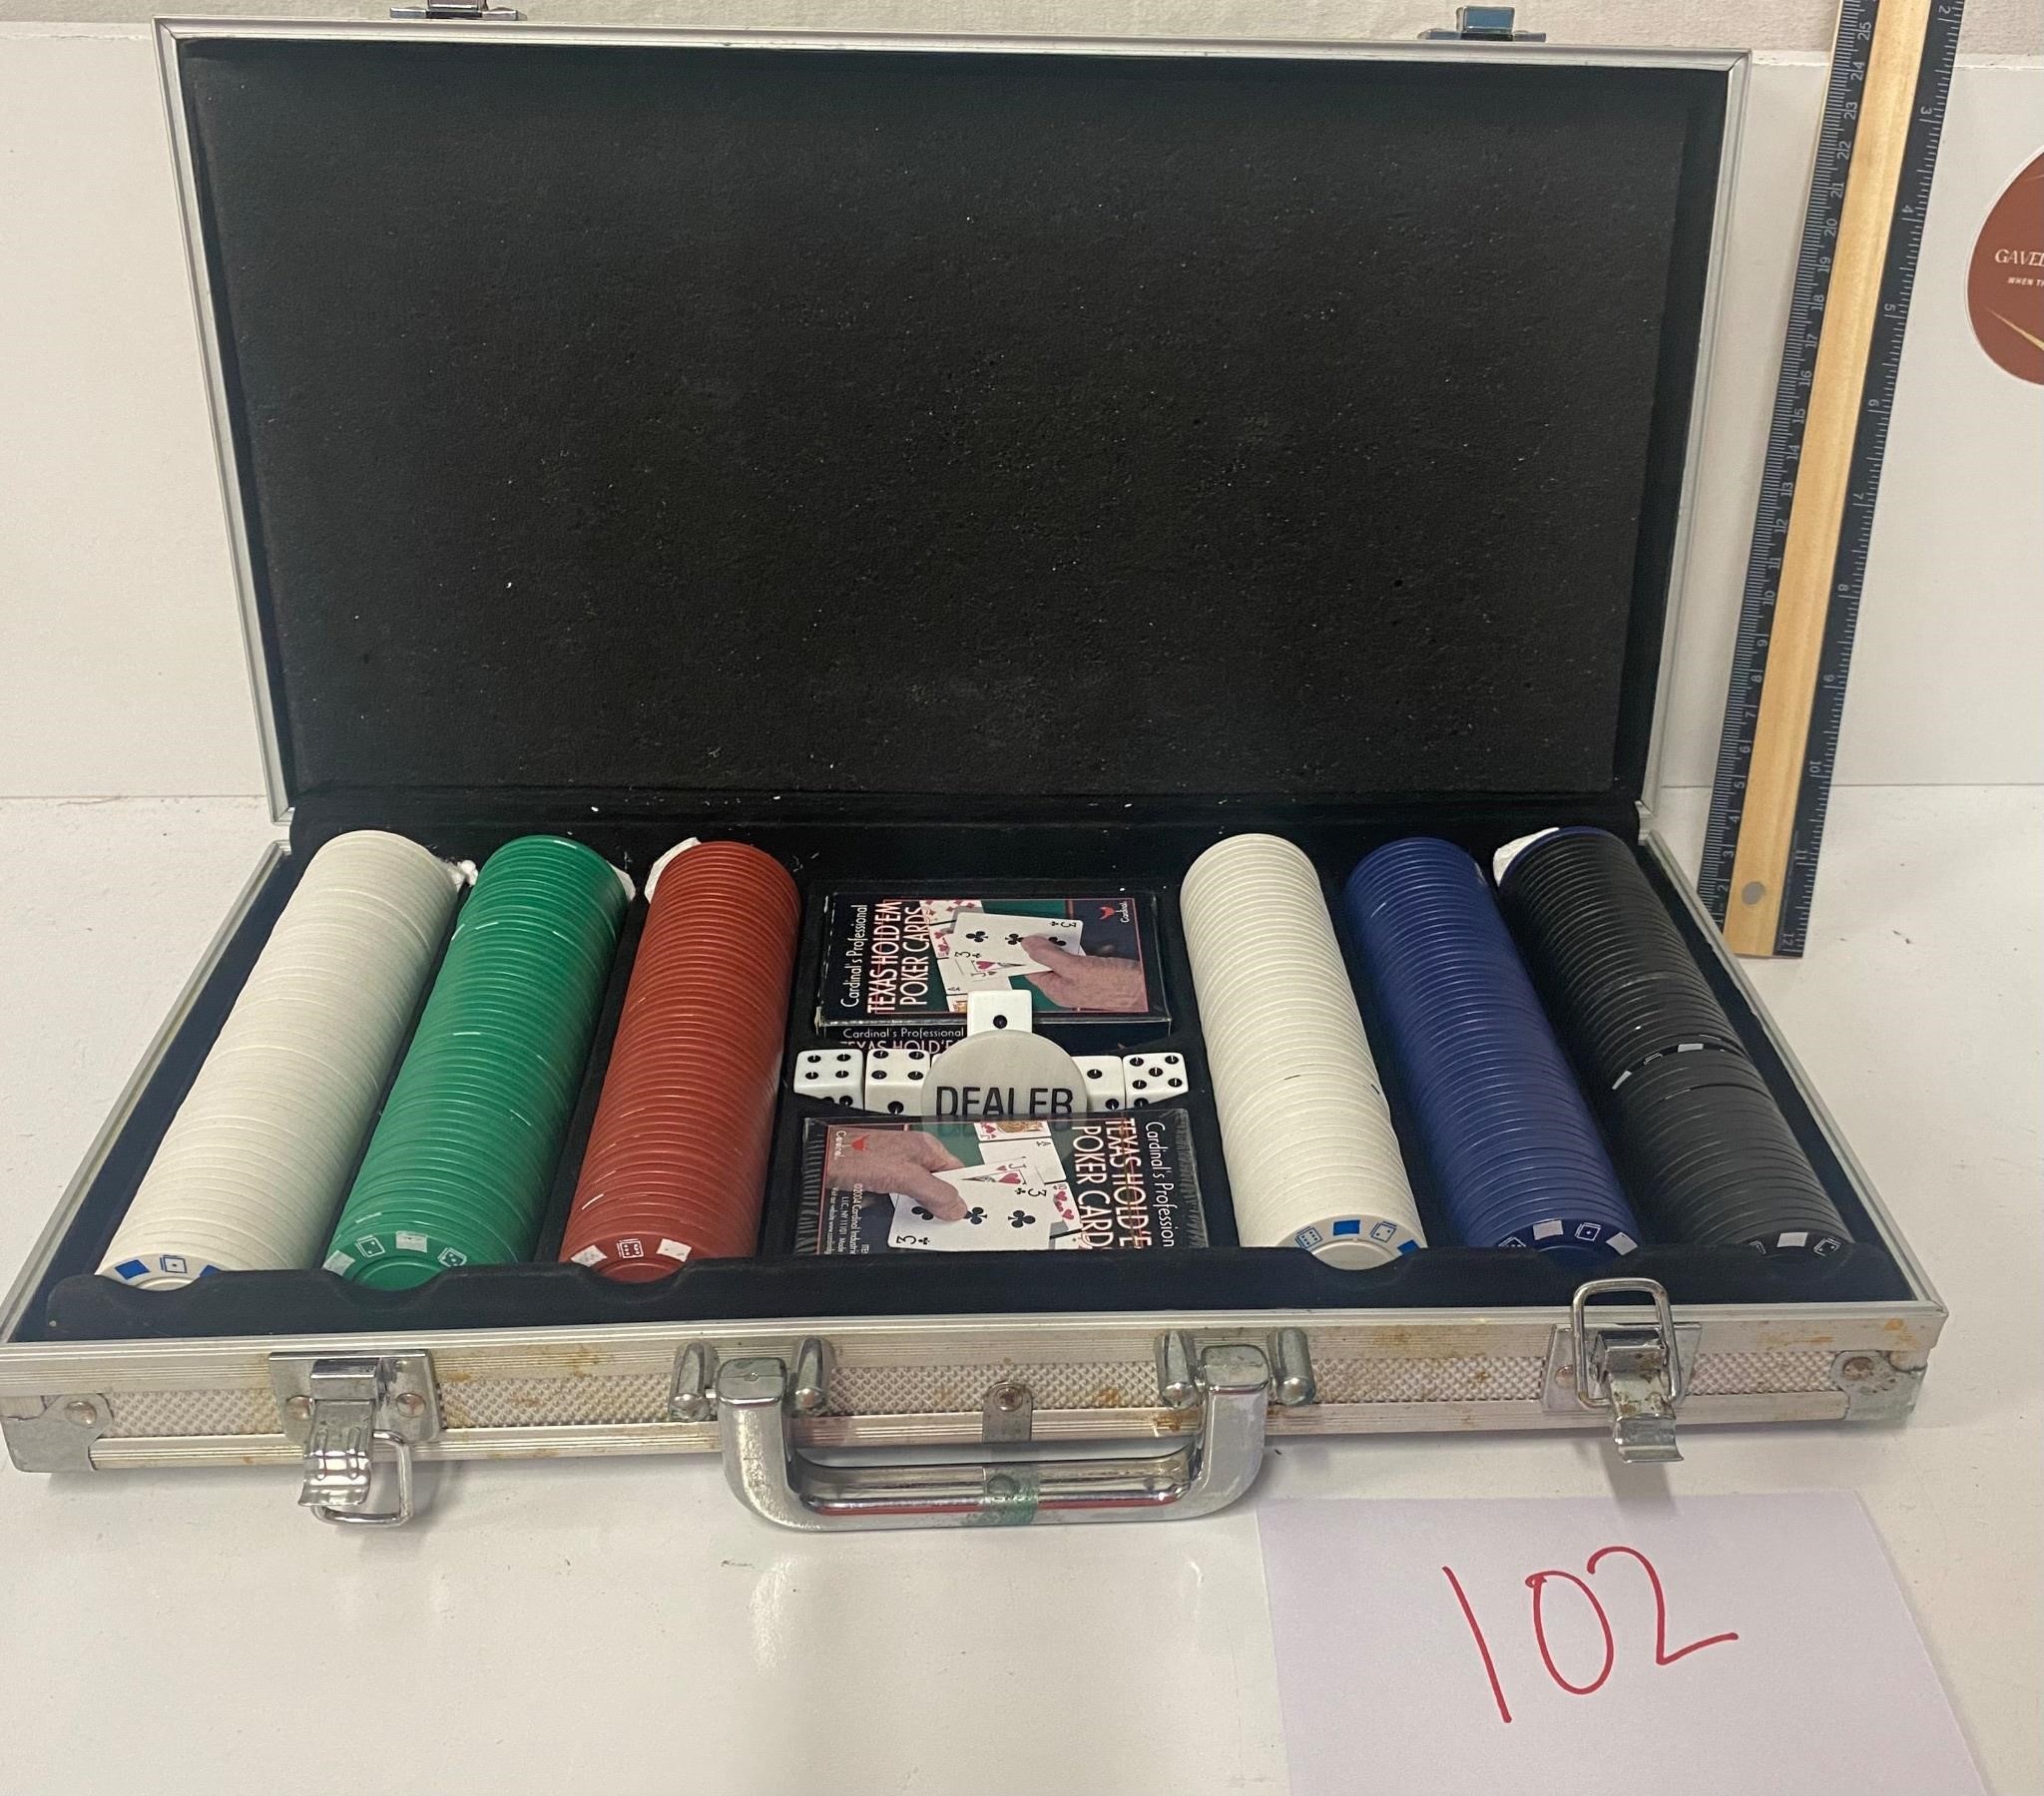 Poker set brand new all pieces inside